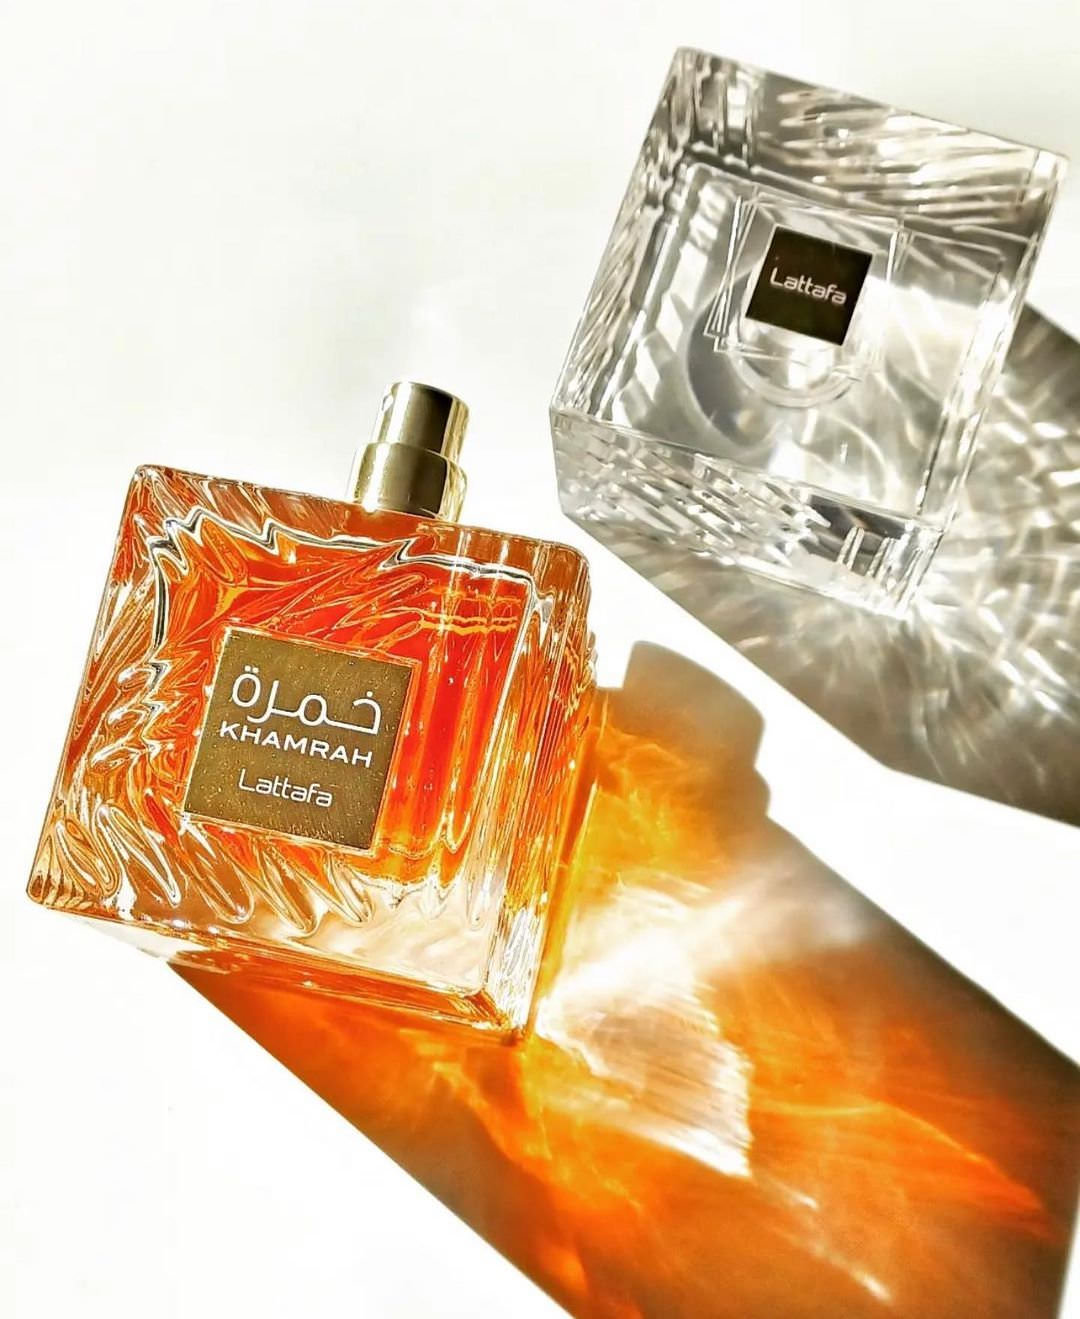 Discover the captivating world of Khamrah Lattafa perfumes, a parallel to Angels&amp;#39; Share By Kilian. Immerse yourself in the enchanting scents that evoke a sun-drenched date orchard.